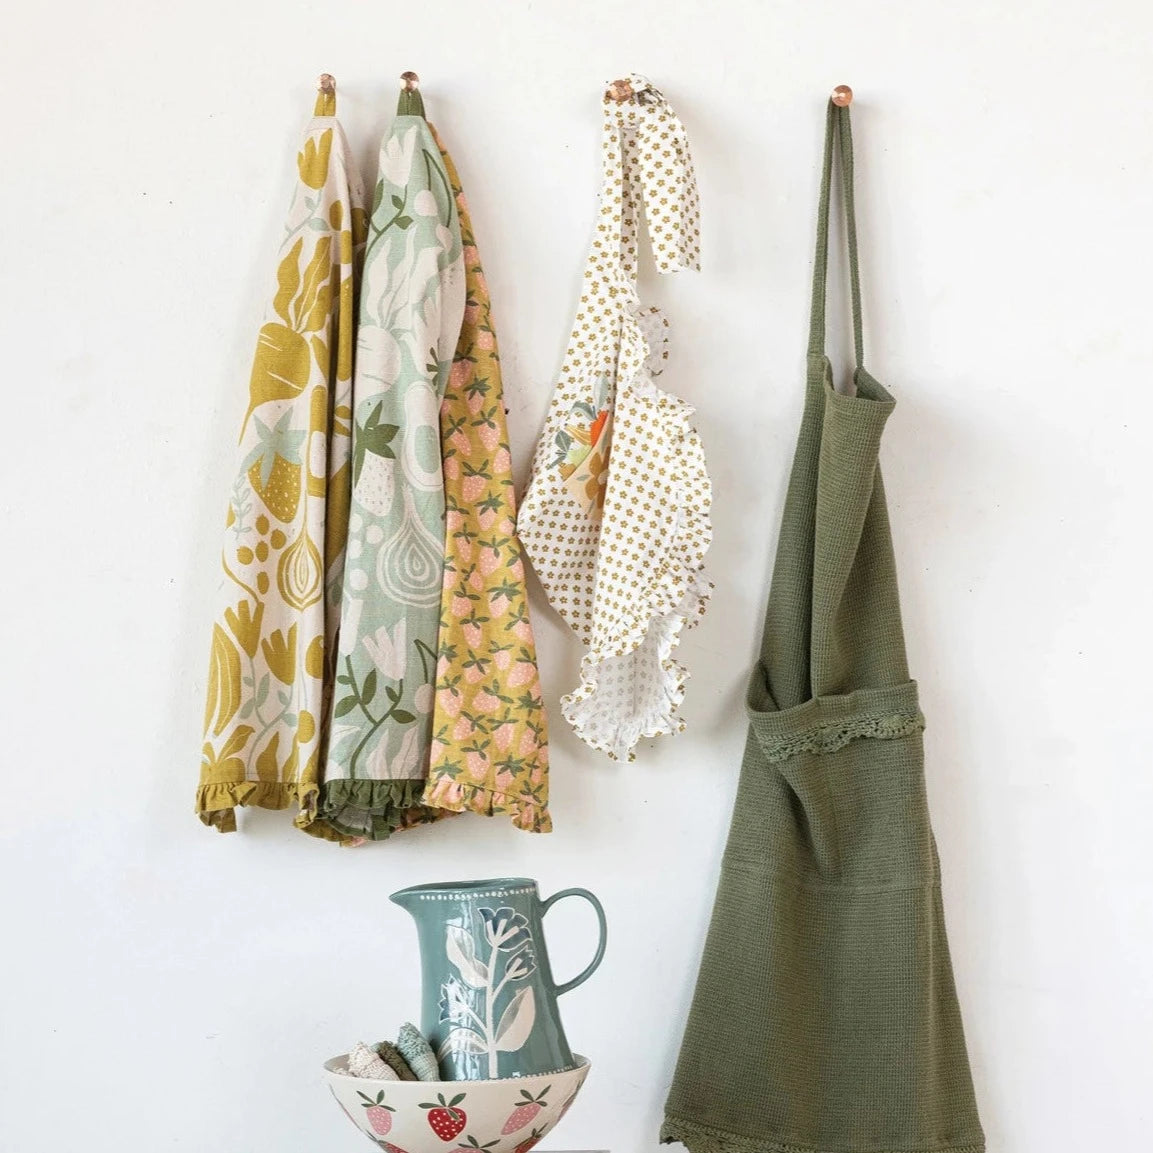 3 styles of fruit and veggie tea towels hanging on hooks next to aprons hanging on other hooks and a bowl and a pitcher stacked underneath.